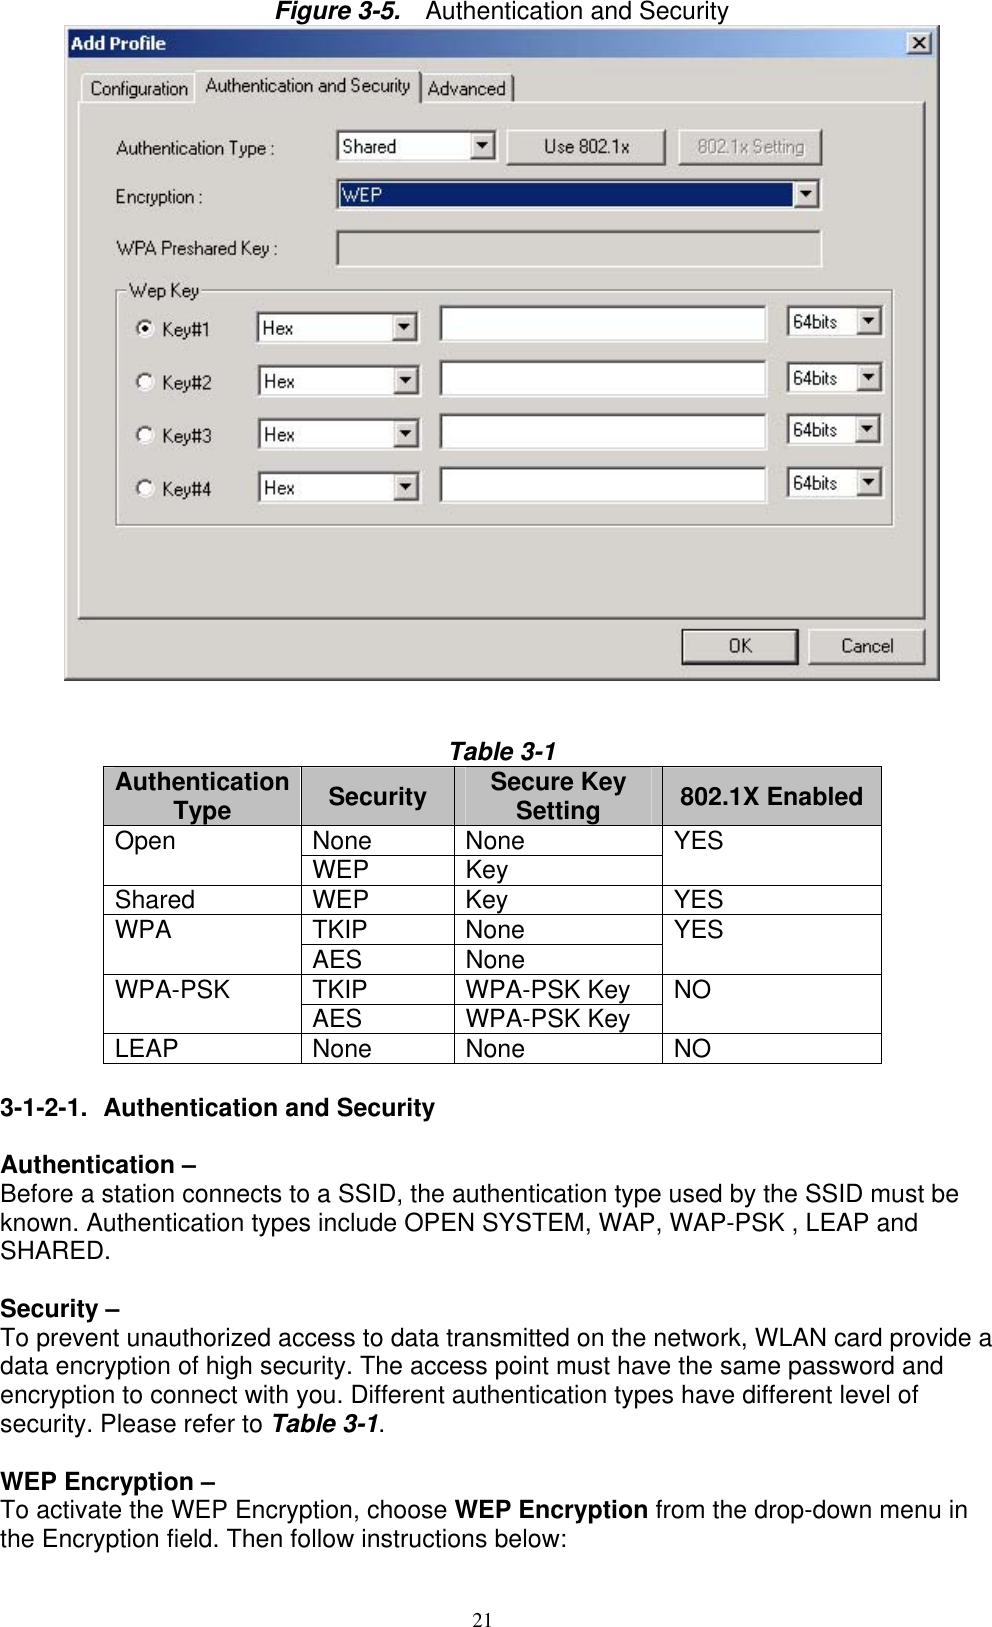 21  Figure 3-5.    Authentication and Security    Table 3-1 Authentication Type  Security  Secure Key Setting  802.1X Enabled None None Open  WEP Key   YES Shared WEP Key  YES TKIP None WPA  AES None  YES TKIP WPA-PSK Key WPA-PSK  AES WPA-PSK Key NO LEAP None None  NO  3-1-2-1.  Authentication and Security  Authentication –   Before a station connects to a SSID, the authentication type used by the SSID must be known. Authentication types include OPEN SYSTEM, WAP, WAP-PSK , LEAP and SHARED.  Security –   To prevent unauthorized access to data transmitted on the network, WLAN card provide a data encryption of high security. The access point must have the same password and encryption to connect with you. Different authentication types have different level of security. Please refer to Table 3-1.  WEP Encryption –   To activate the WEP Encryption, choose WEP Encryption from the drop-down menu in the Encryption field. Then follow instructions below: 